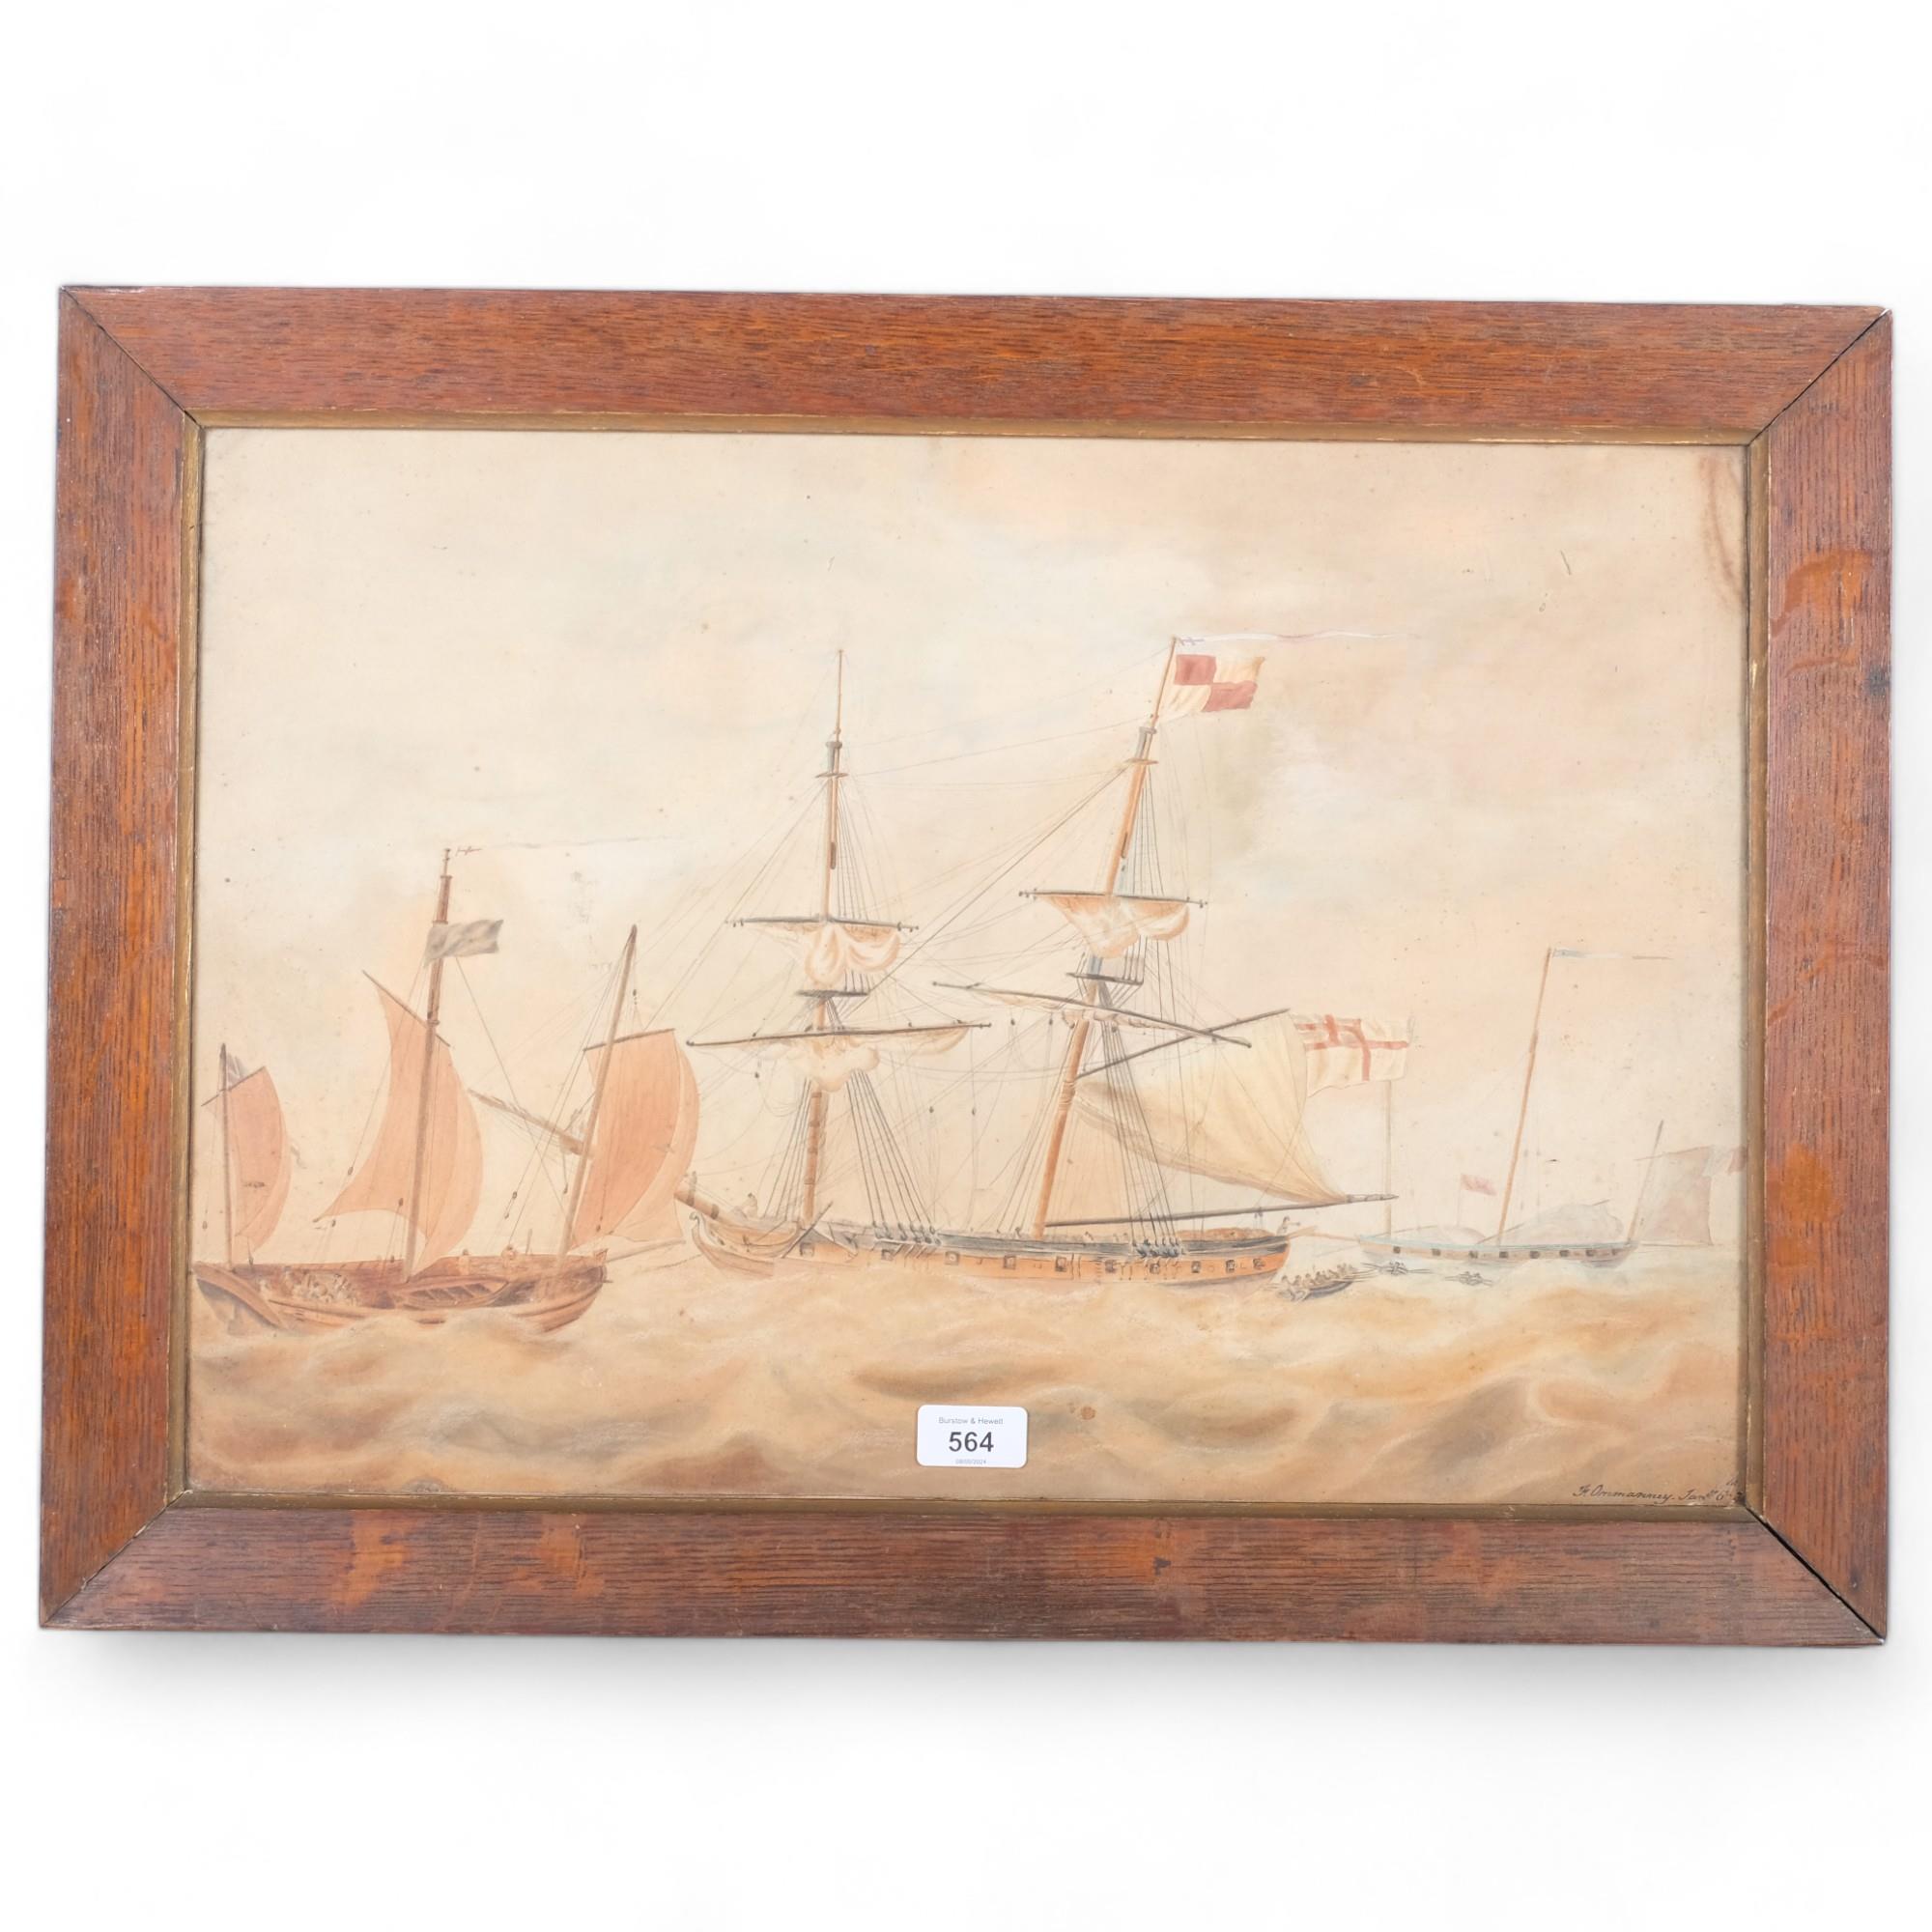 Watercolour, signed and dated, English and Dutch sailing ships involved in trading of merchandise,